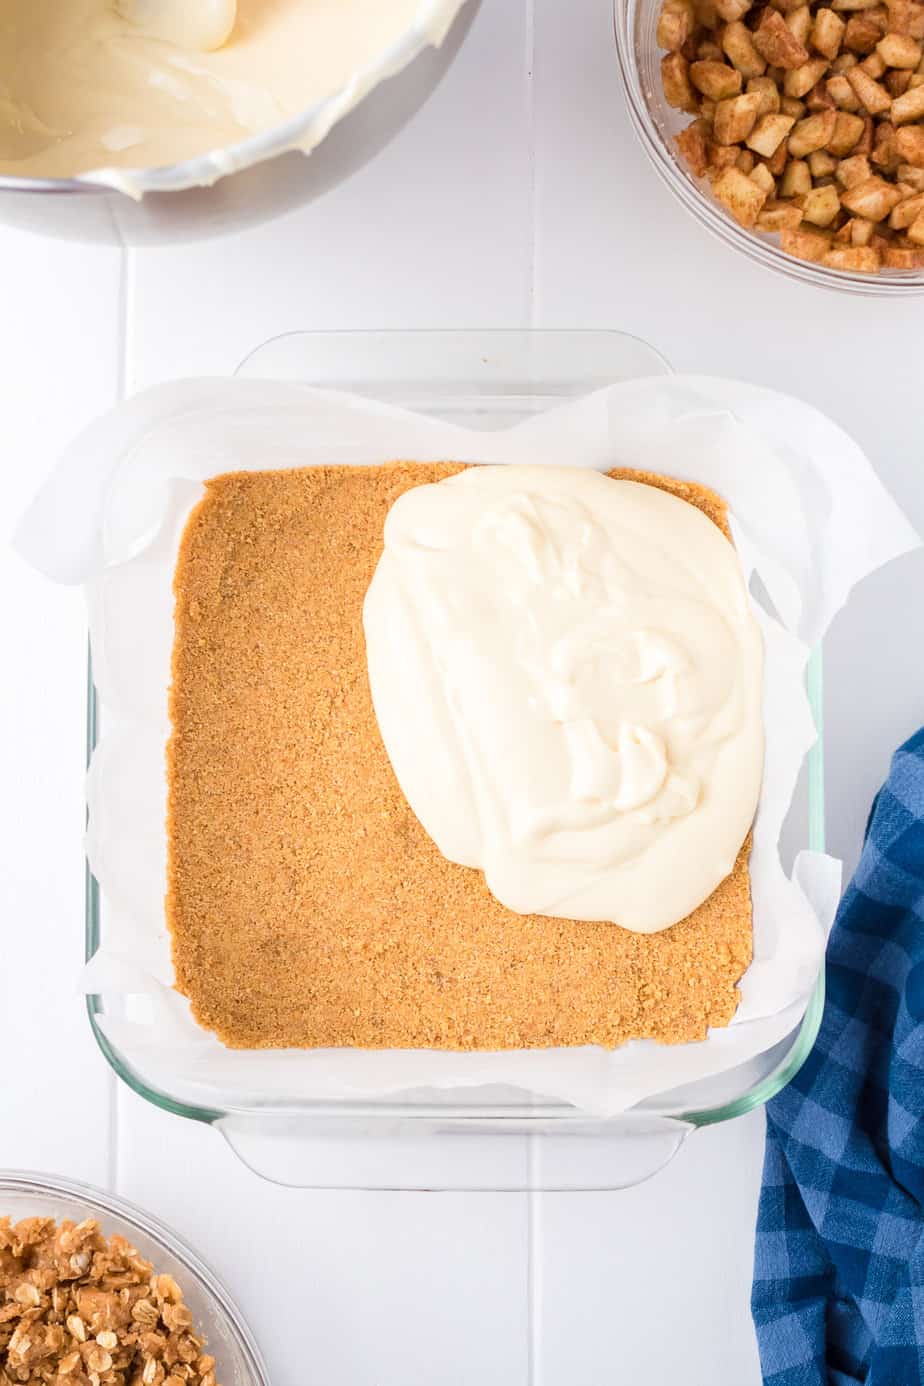 Spreading the cheesecake layer over the graham cracker crust in a square pan from overhead.